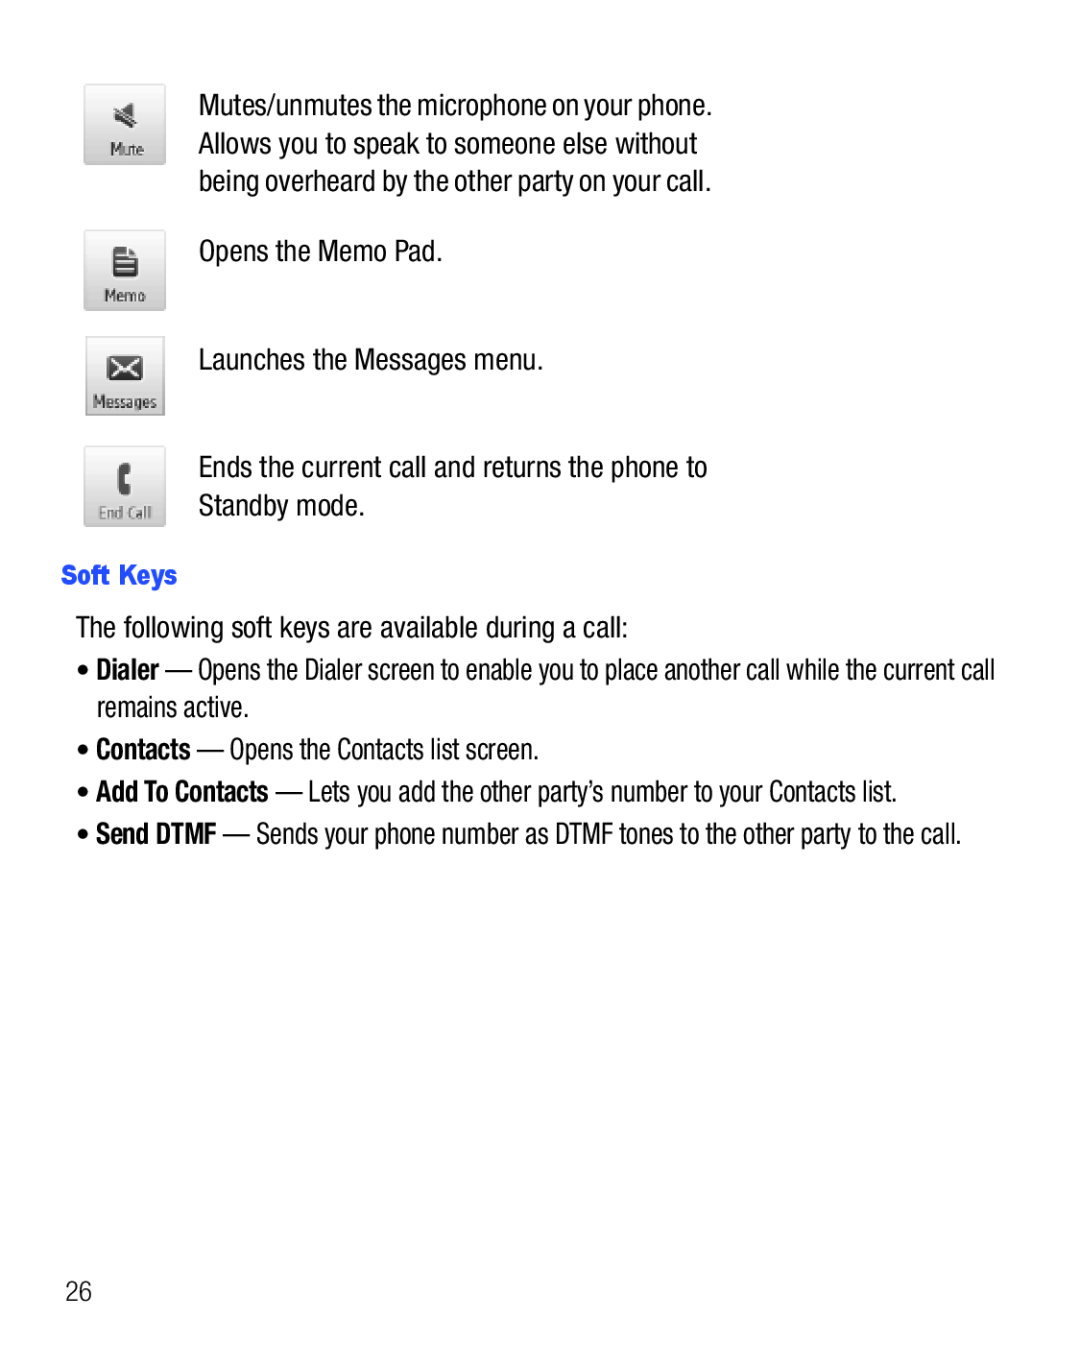 Samsung GH68-25119A user manual Opens the Memo Pad Launches the Messages menu 